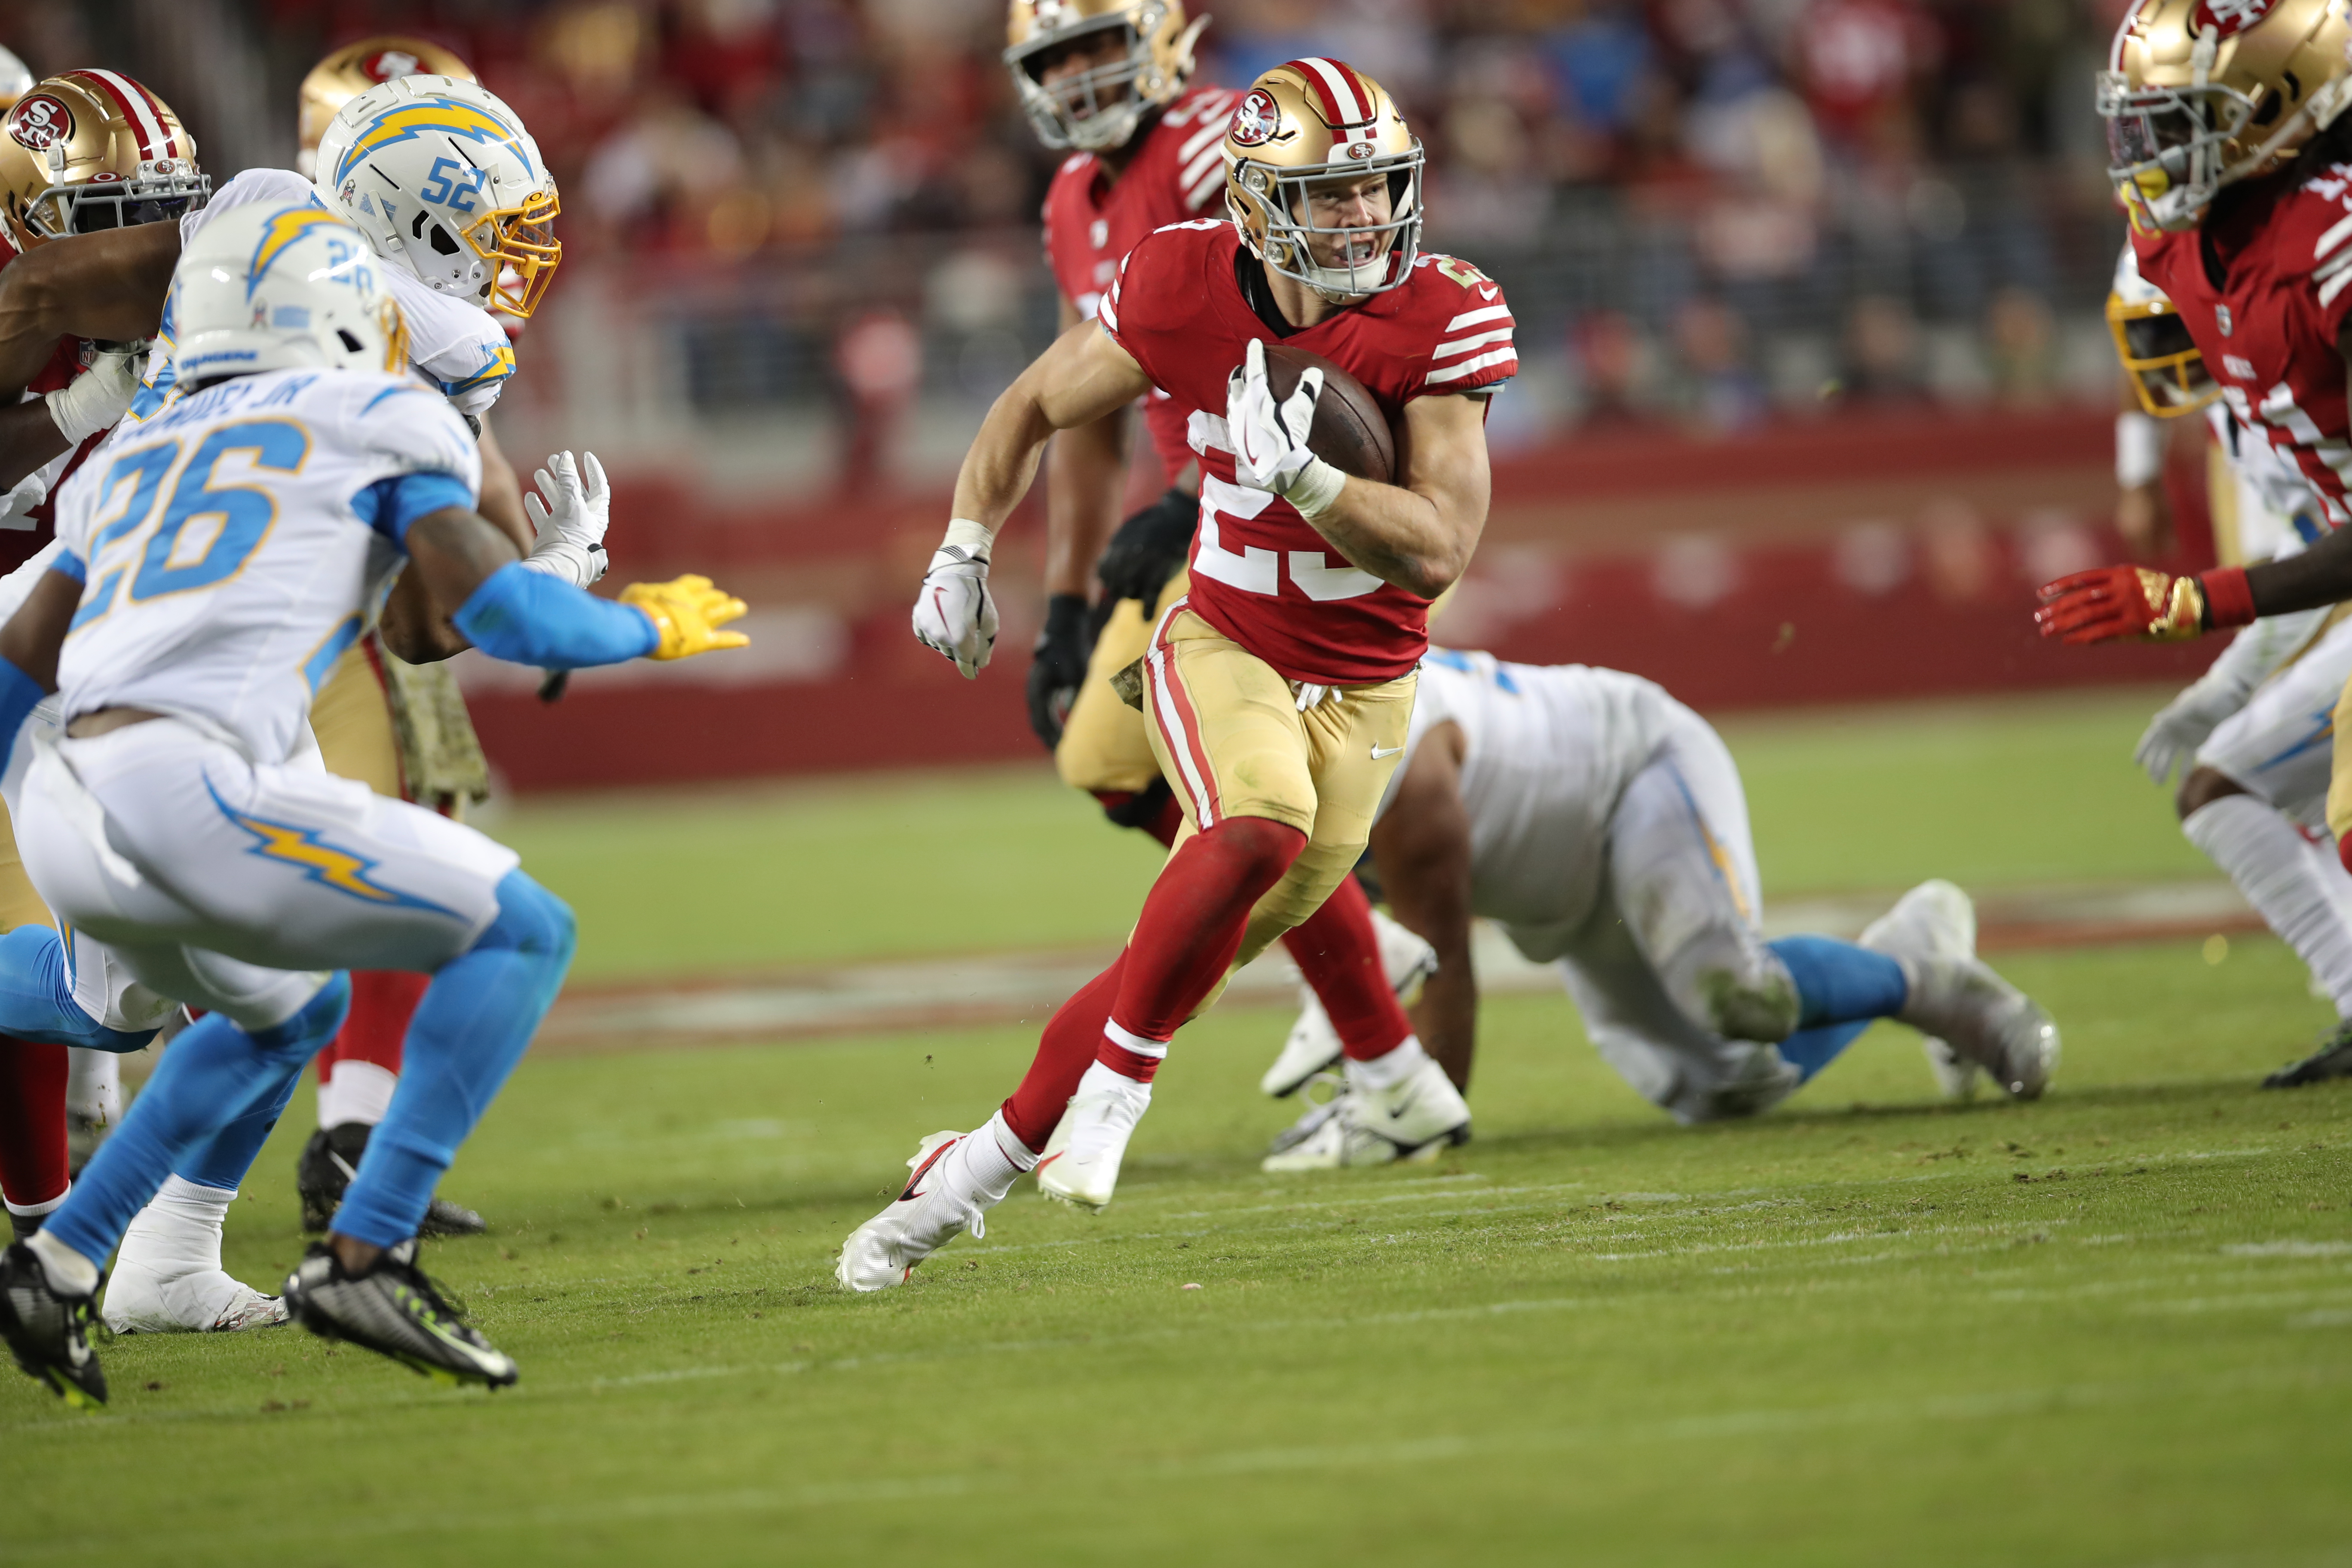 Christian McCaffrey #23 of the San Francisco 49ers rushes during the game against the Los Angeles Chargers at Levi’s Stadium on November 13, 2022 in Santa Clara, California. The 49ers defeated the Chargers 22-16.